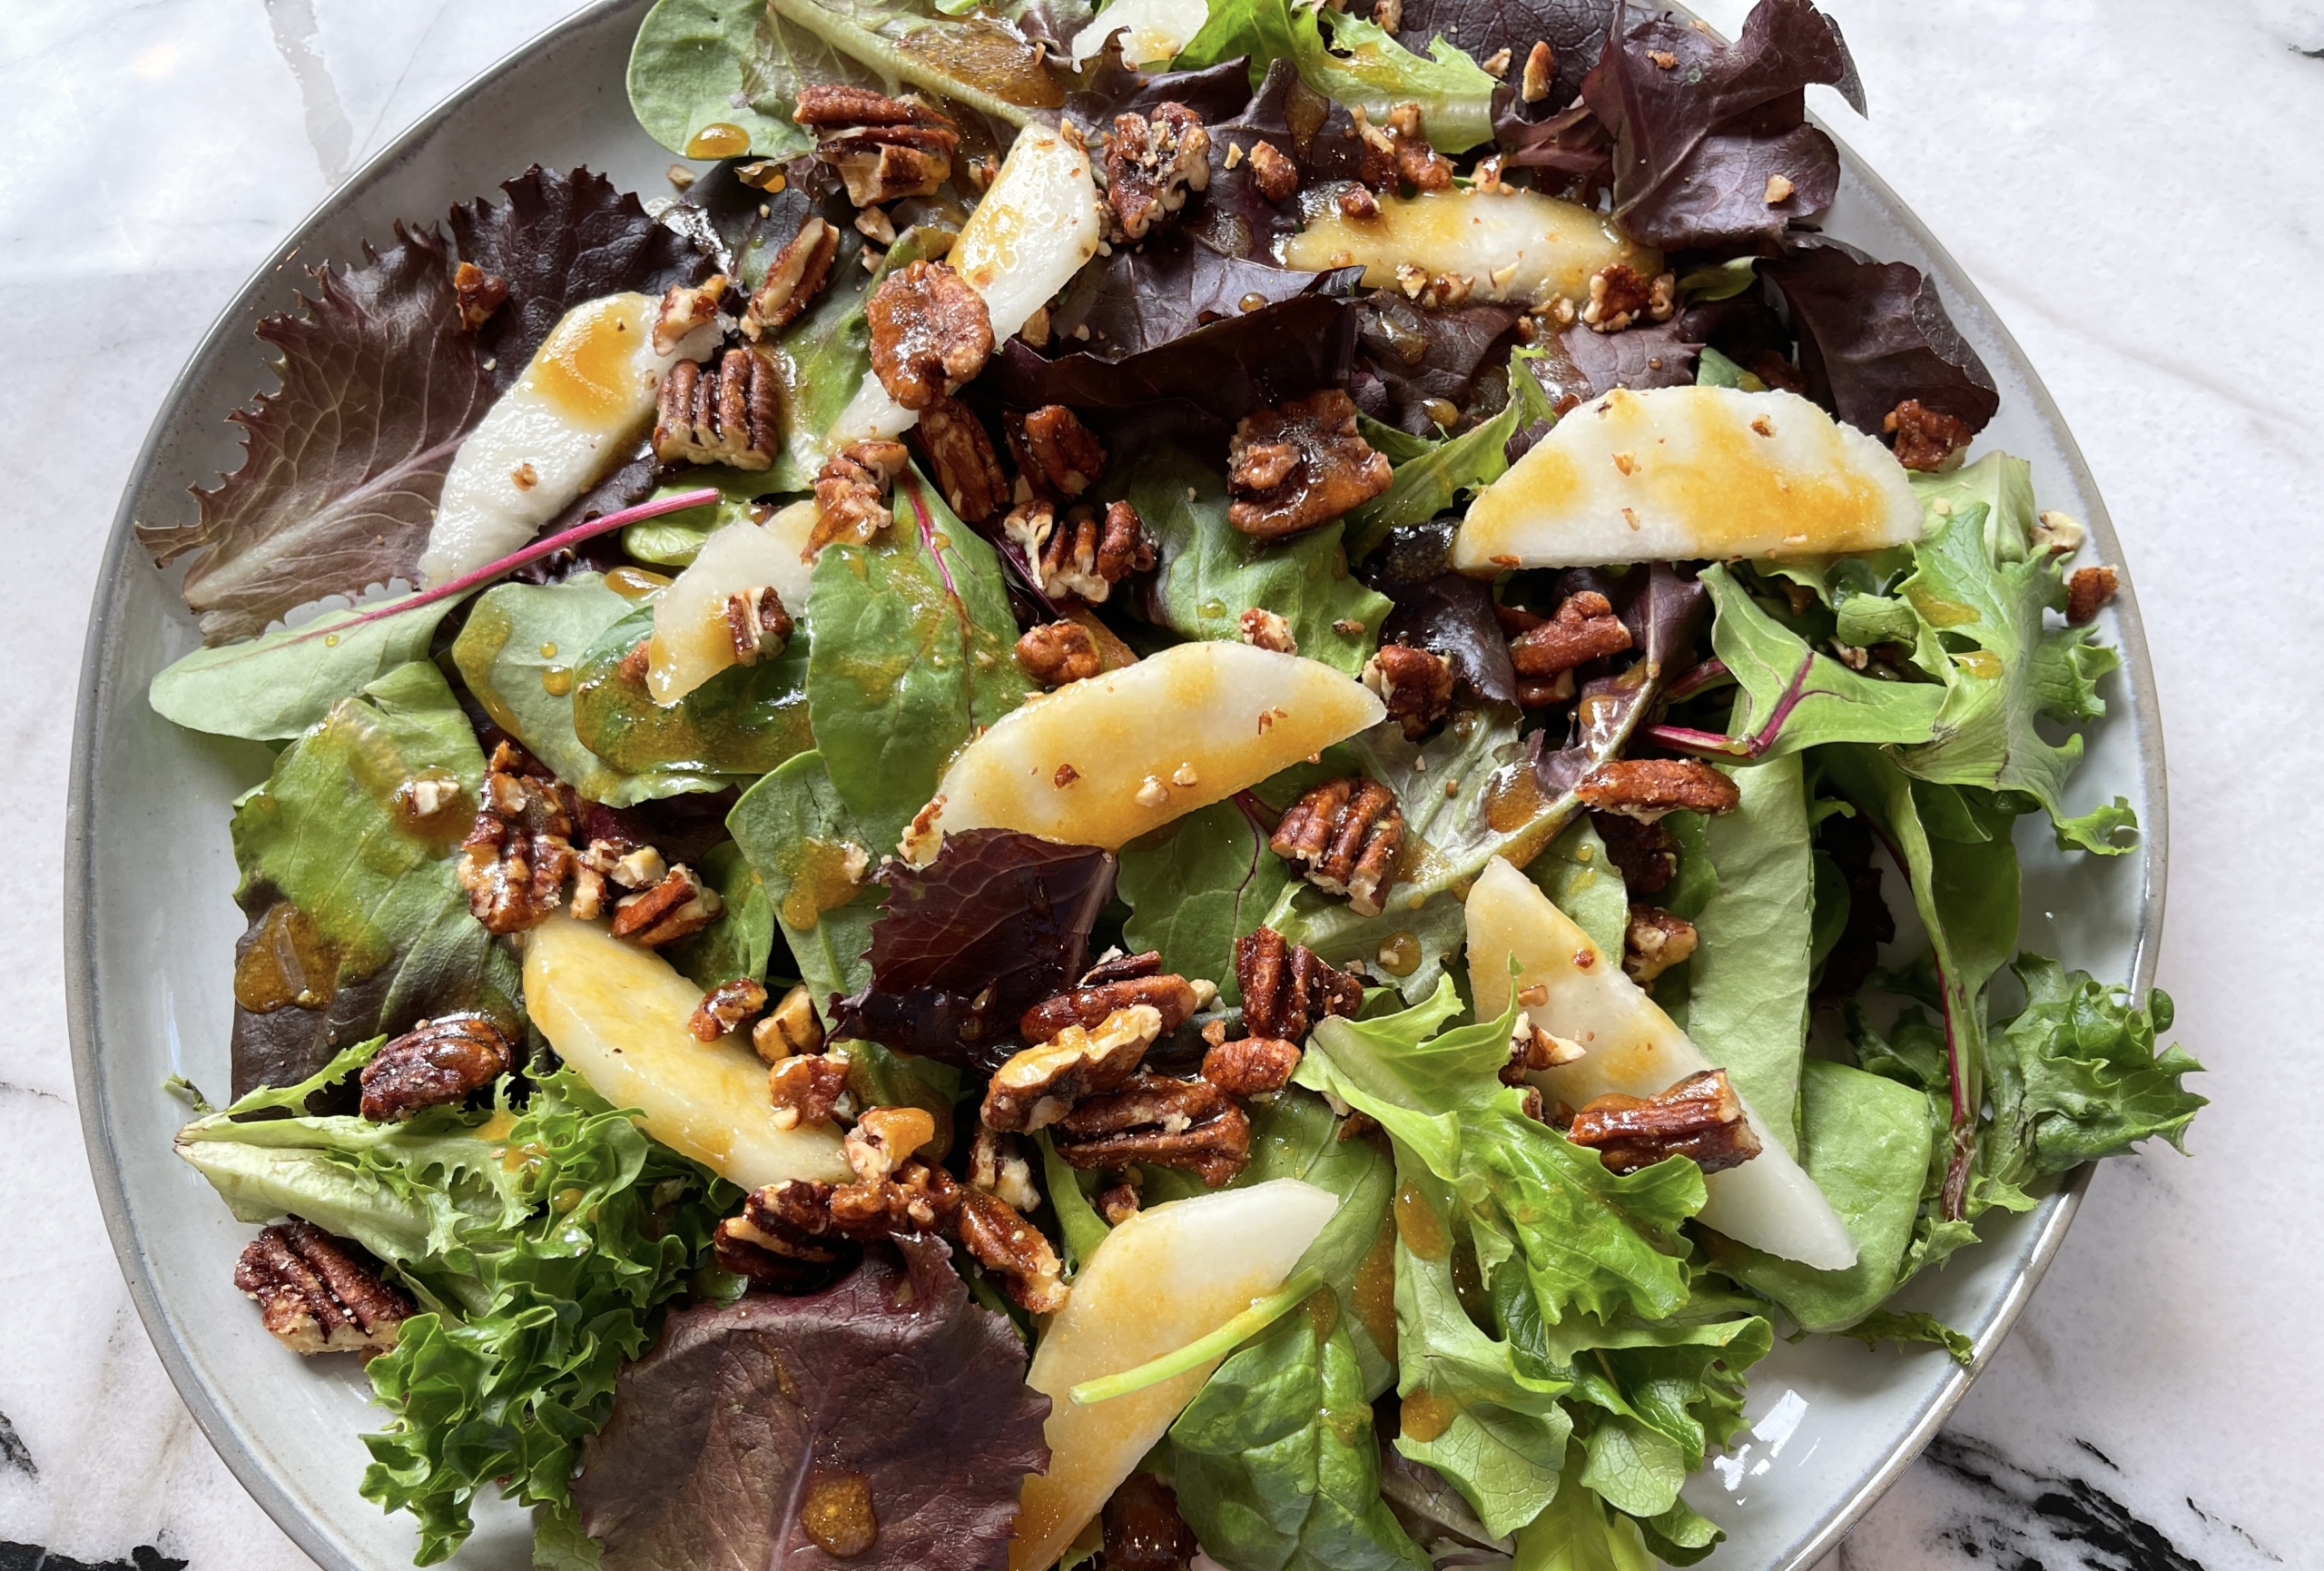 place lettuce on a platter or in a bowl.  Top with sliced pears, candied pecans, and goat or blue cheese if desired.  Drizzle maple mustard dressing on top